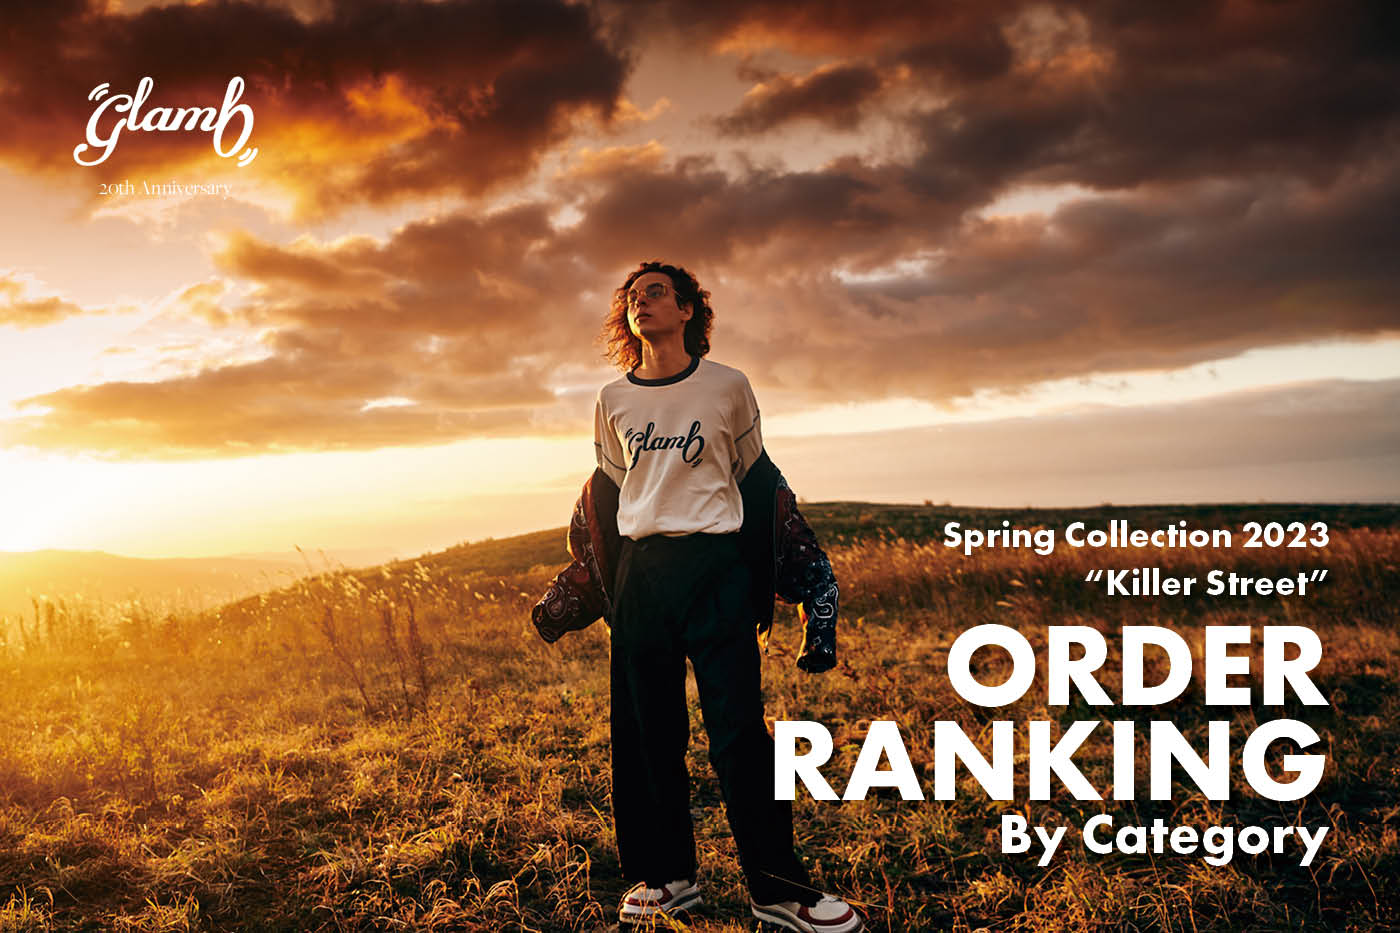 Spring Collection 2023 ORDER RANKING